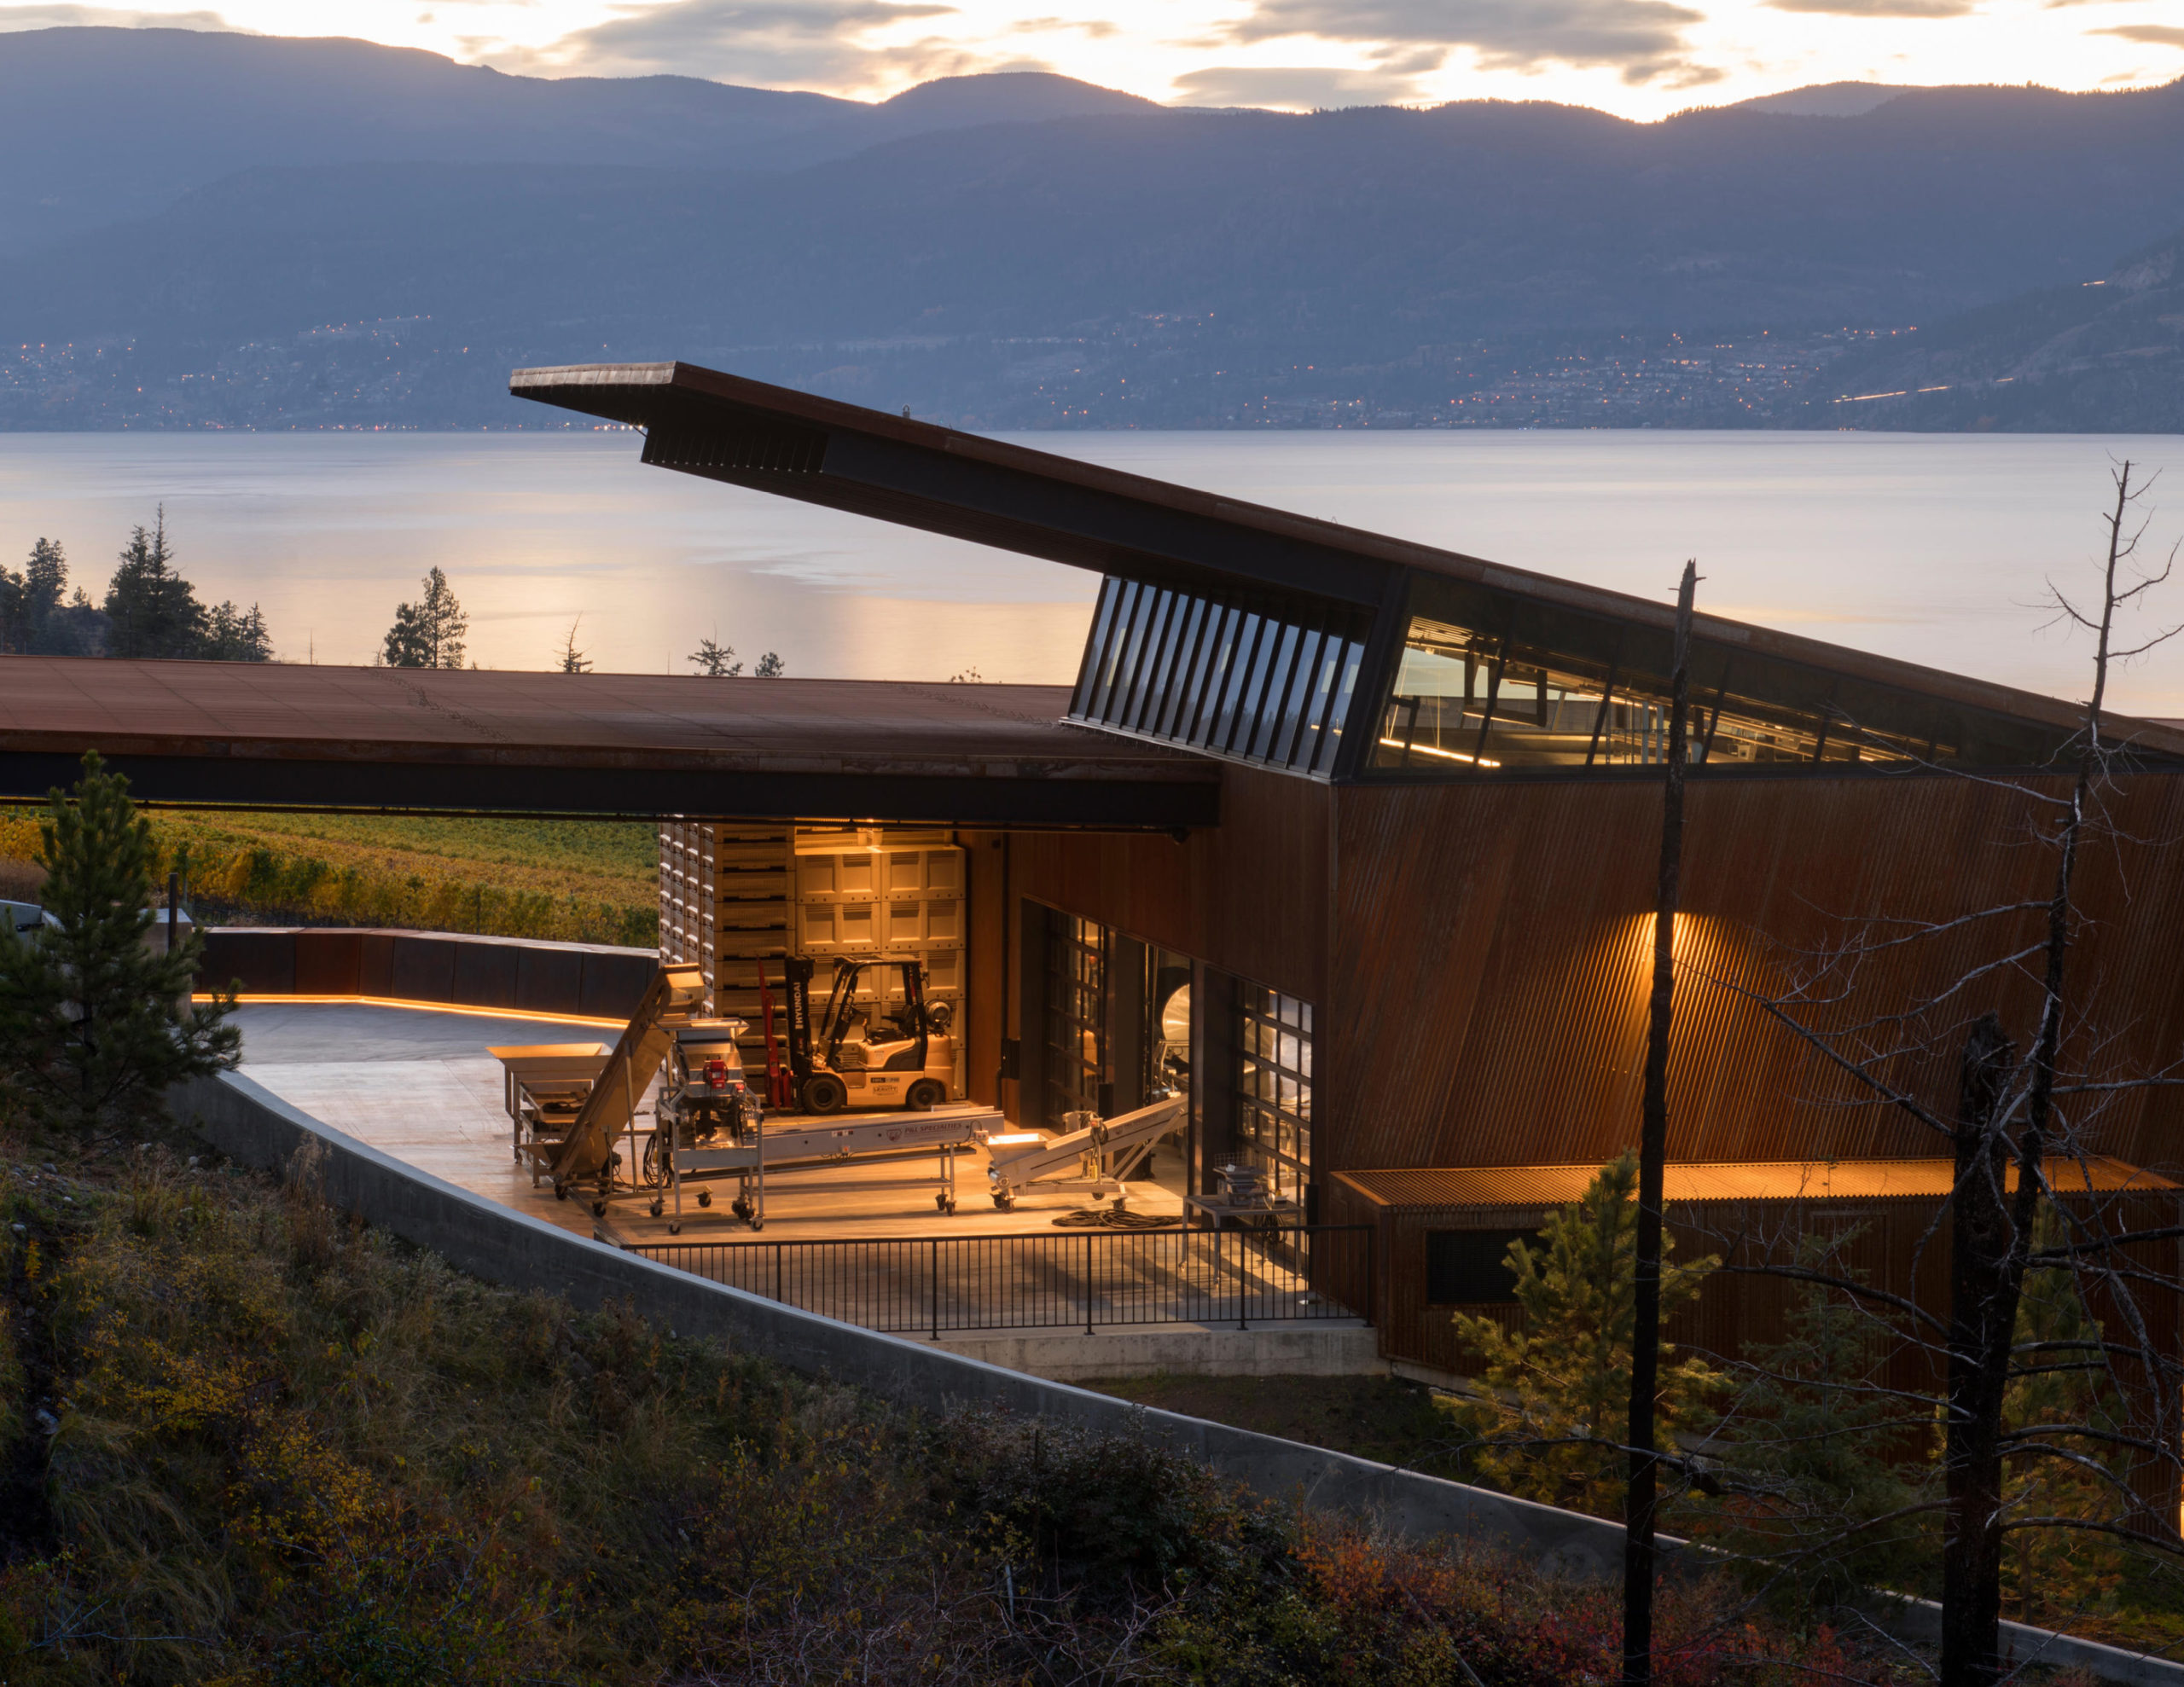 How Olson Kundig Challenges Preconceived Notions of Their Architectural Practice